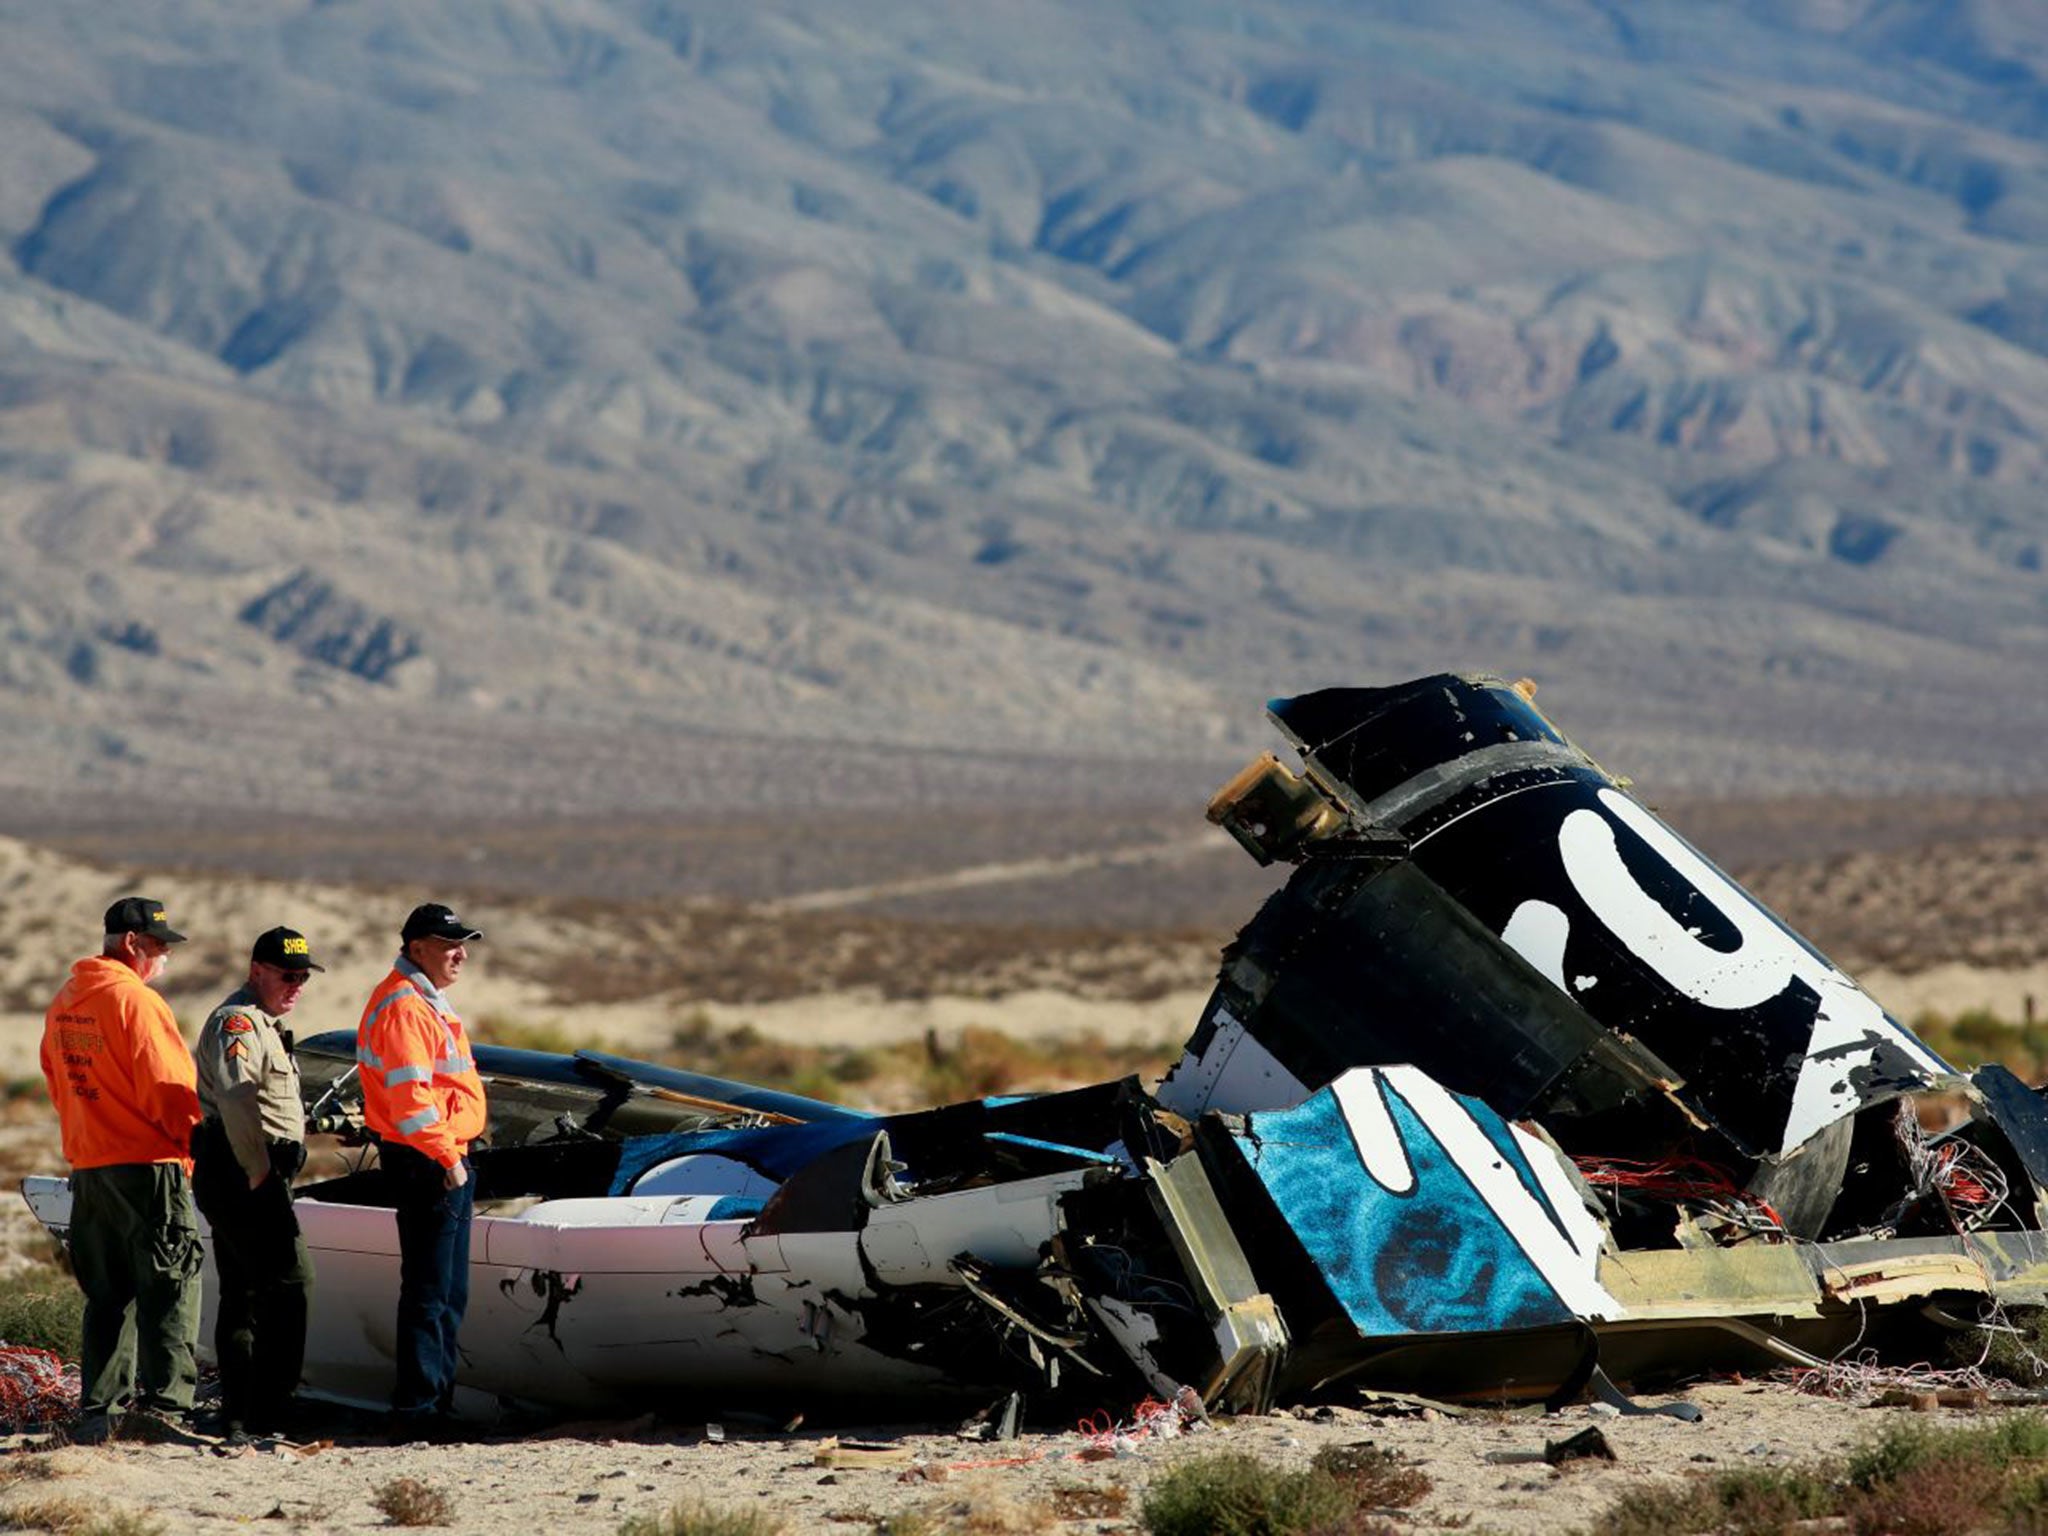 Wreckage of the first Virgin Galactic SpaceShipTwo is inspected in the Californian desert after it crashed on 31 October 2014